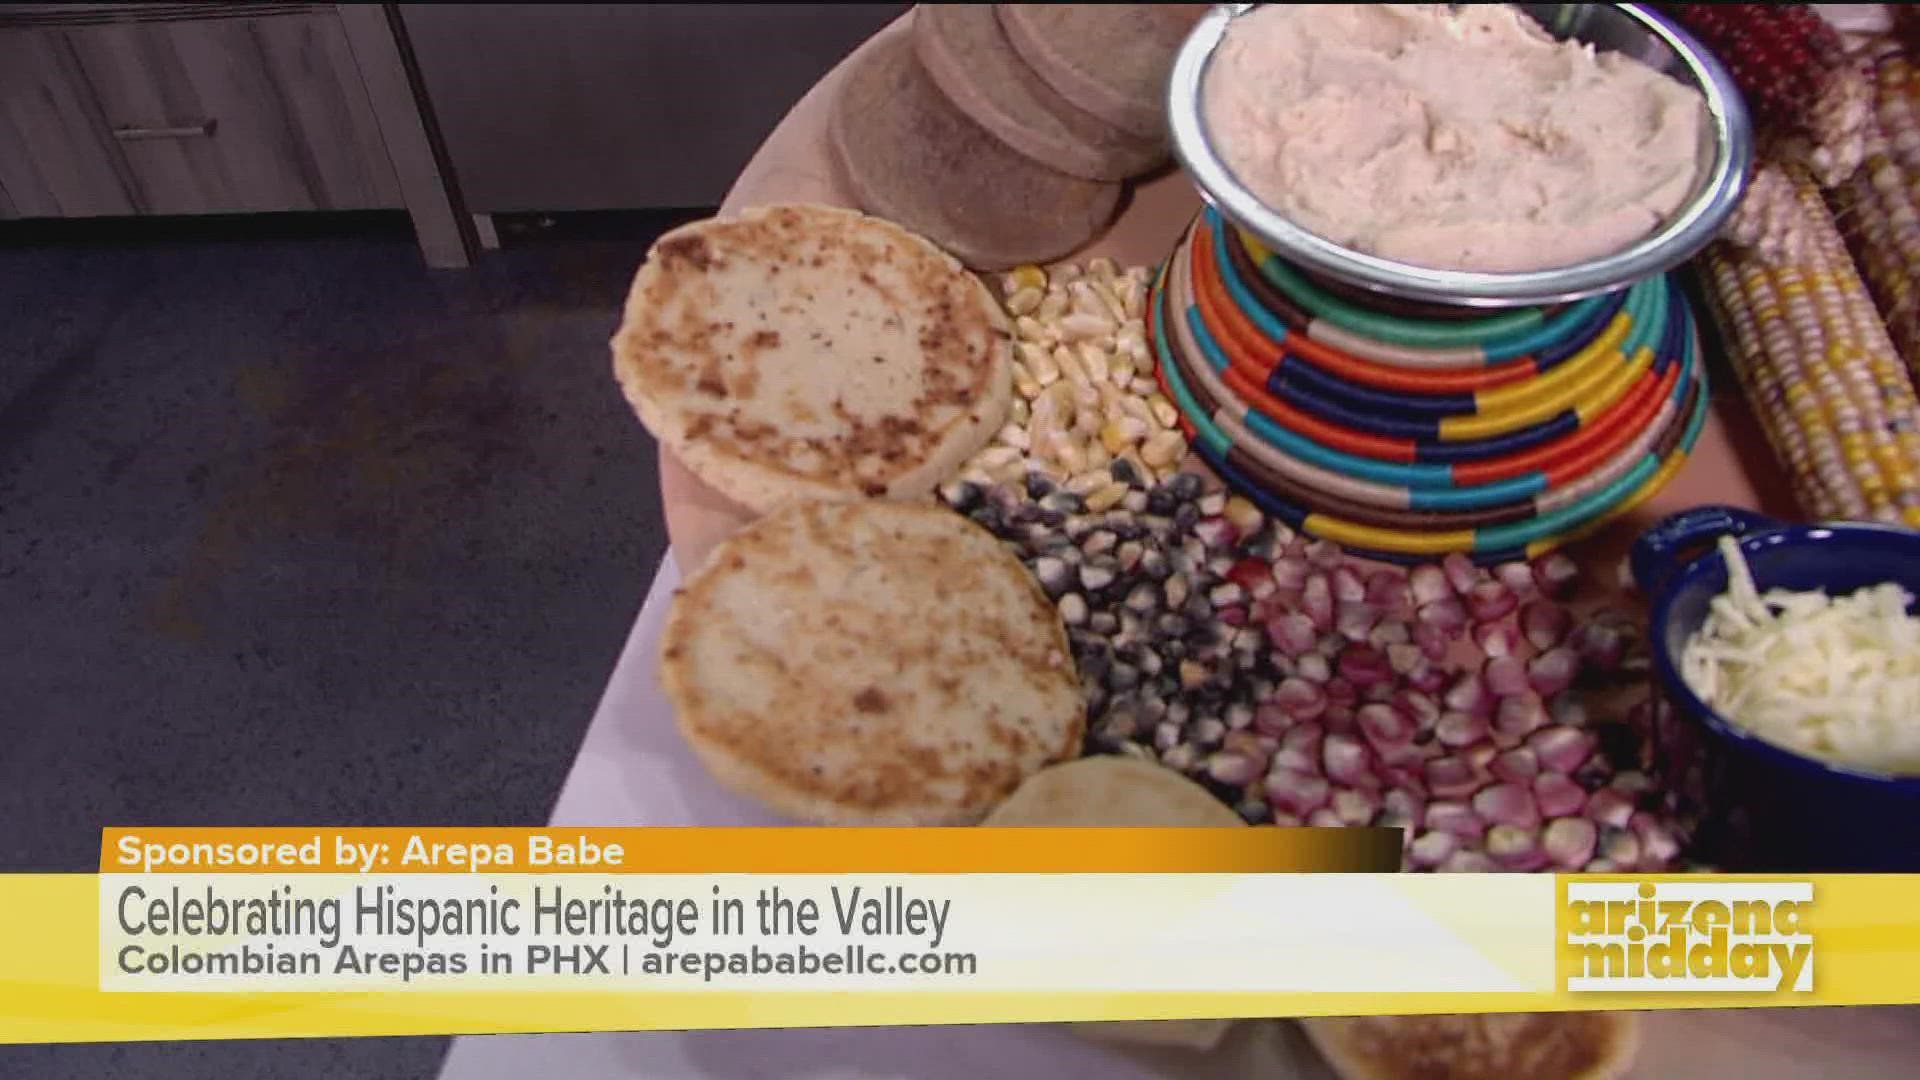 Angelica Urrego, Owner of Arepa Babe, shows us the three types of arepas she makes & how she got started bringing Colombian food to Phoenix